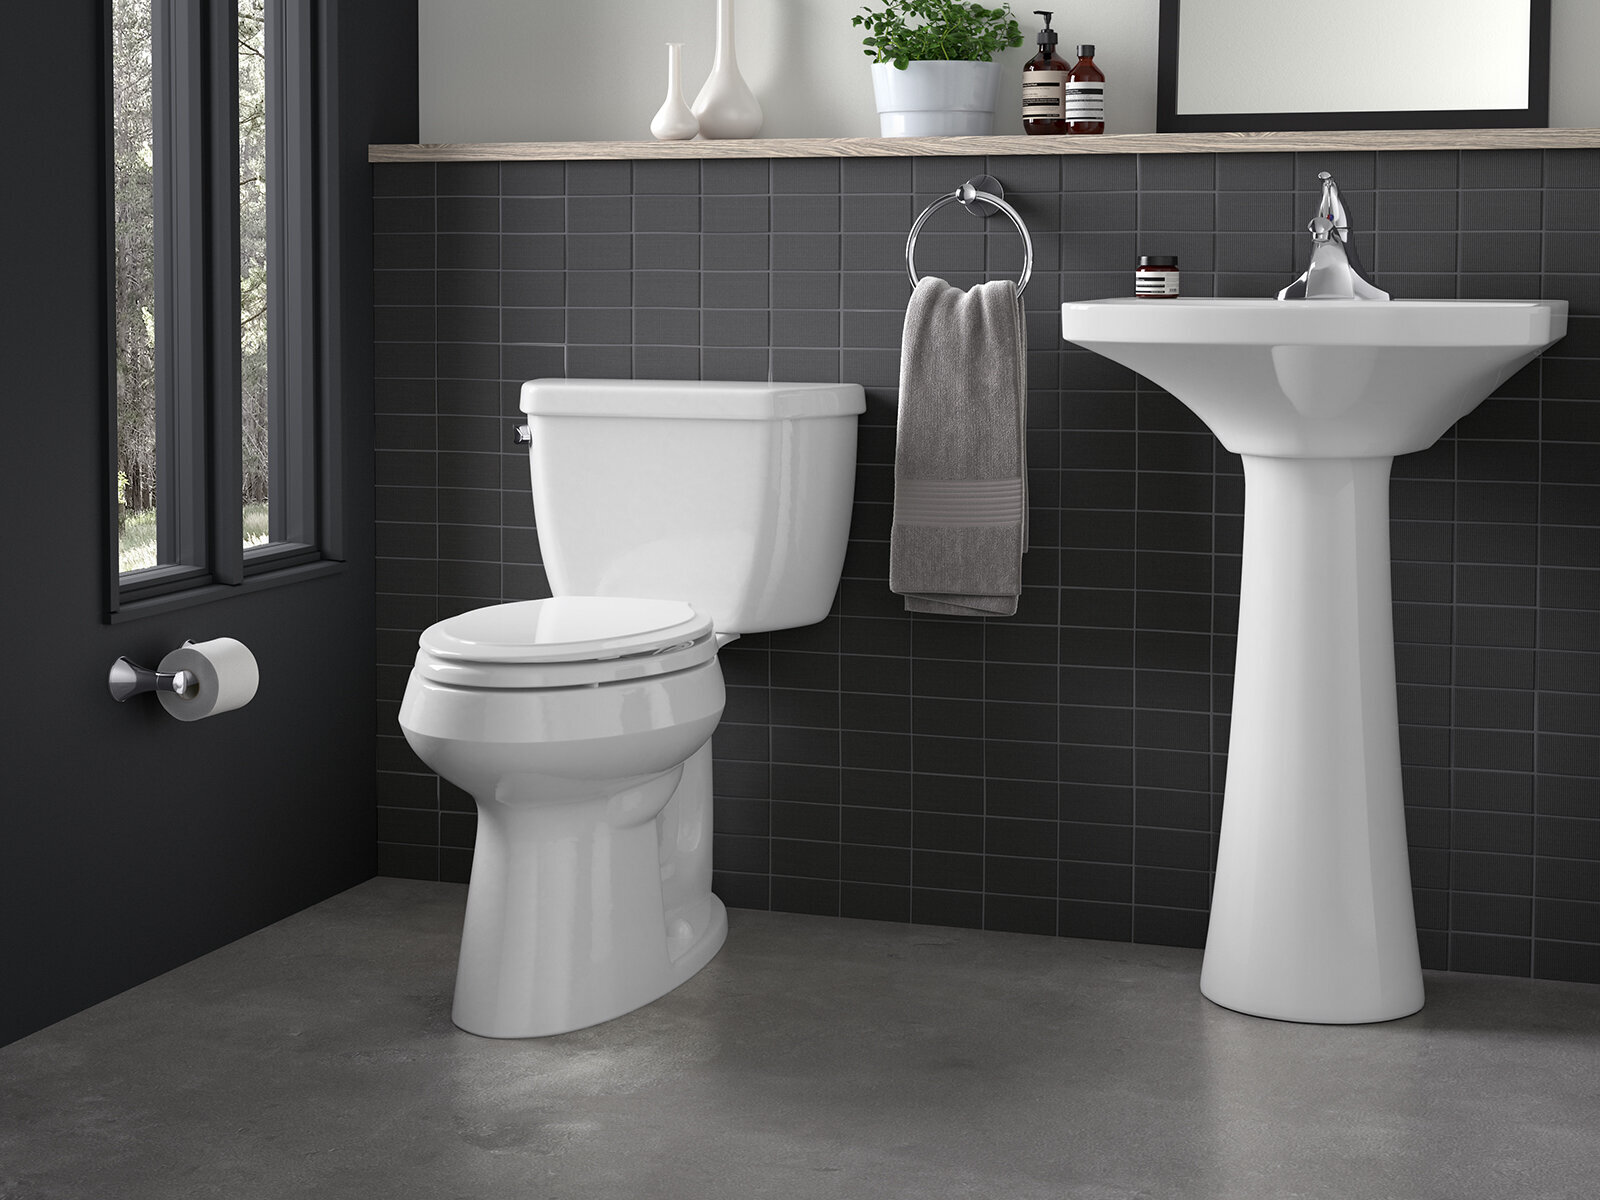 highline-classic-comfort-height-two-piece-elongated-128-gpf-toilet-with-class-five-flush-technology-and-left-hand-trip-lever.jpg